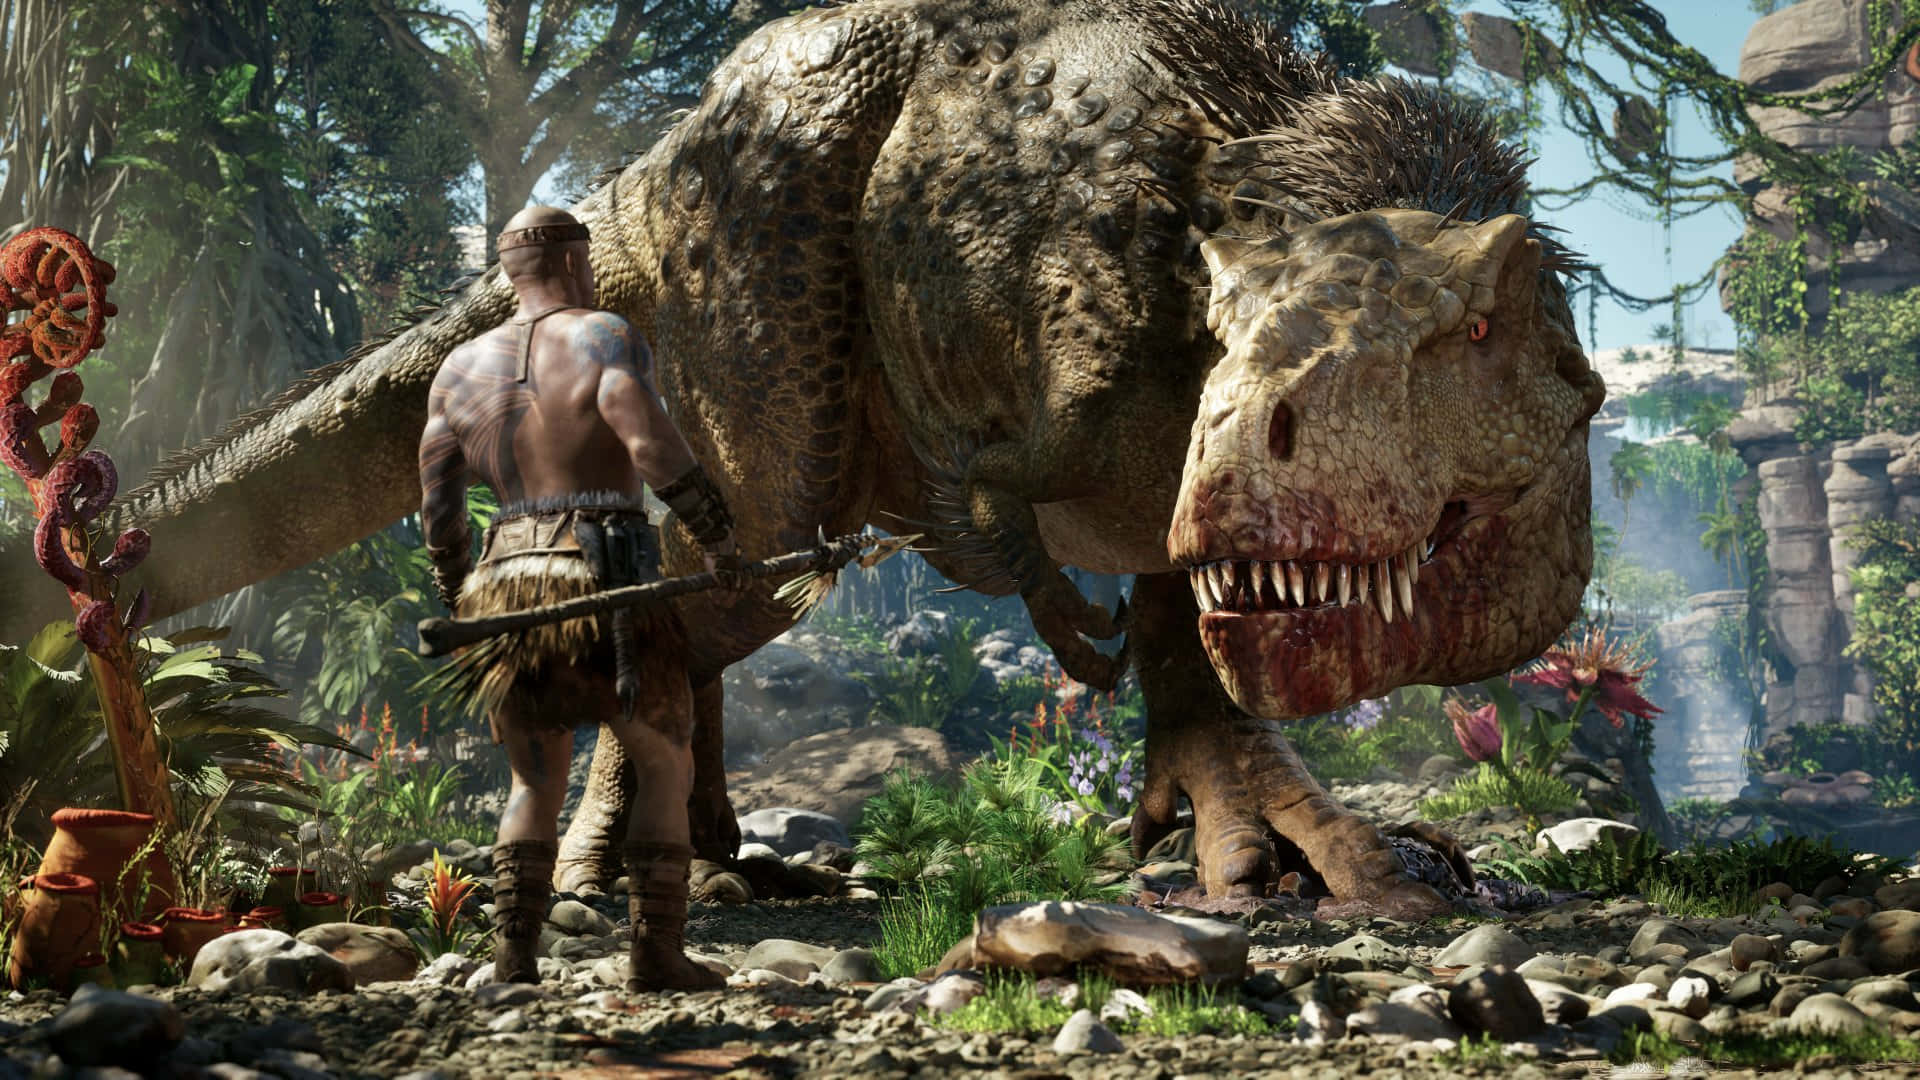 A Man Is Standing Next To A Dinosaur In A Jungle Background